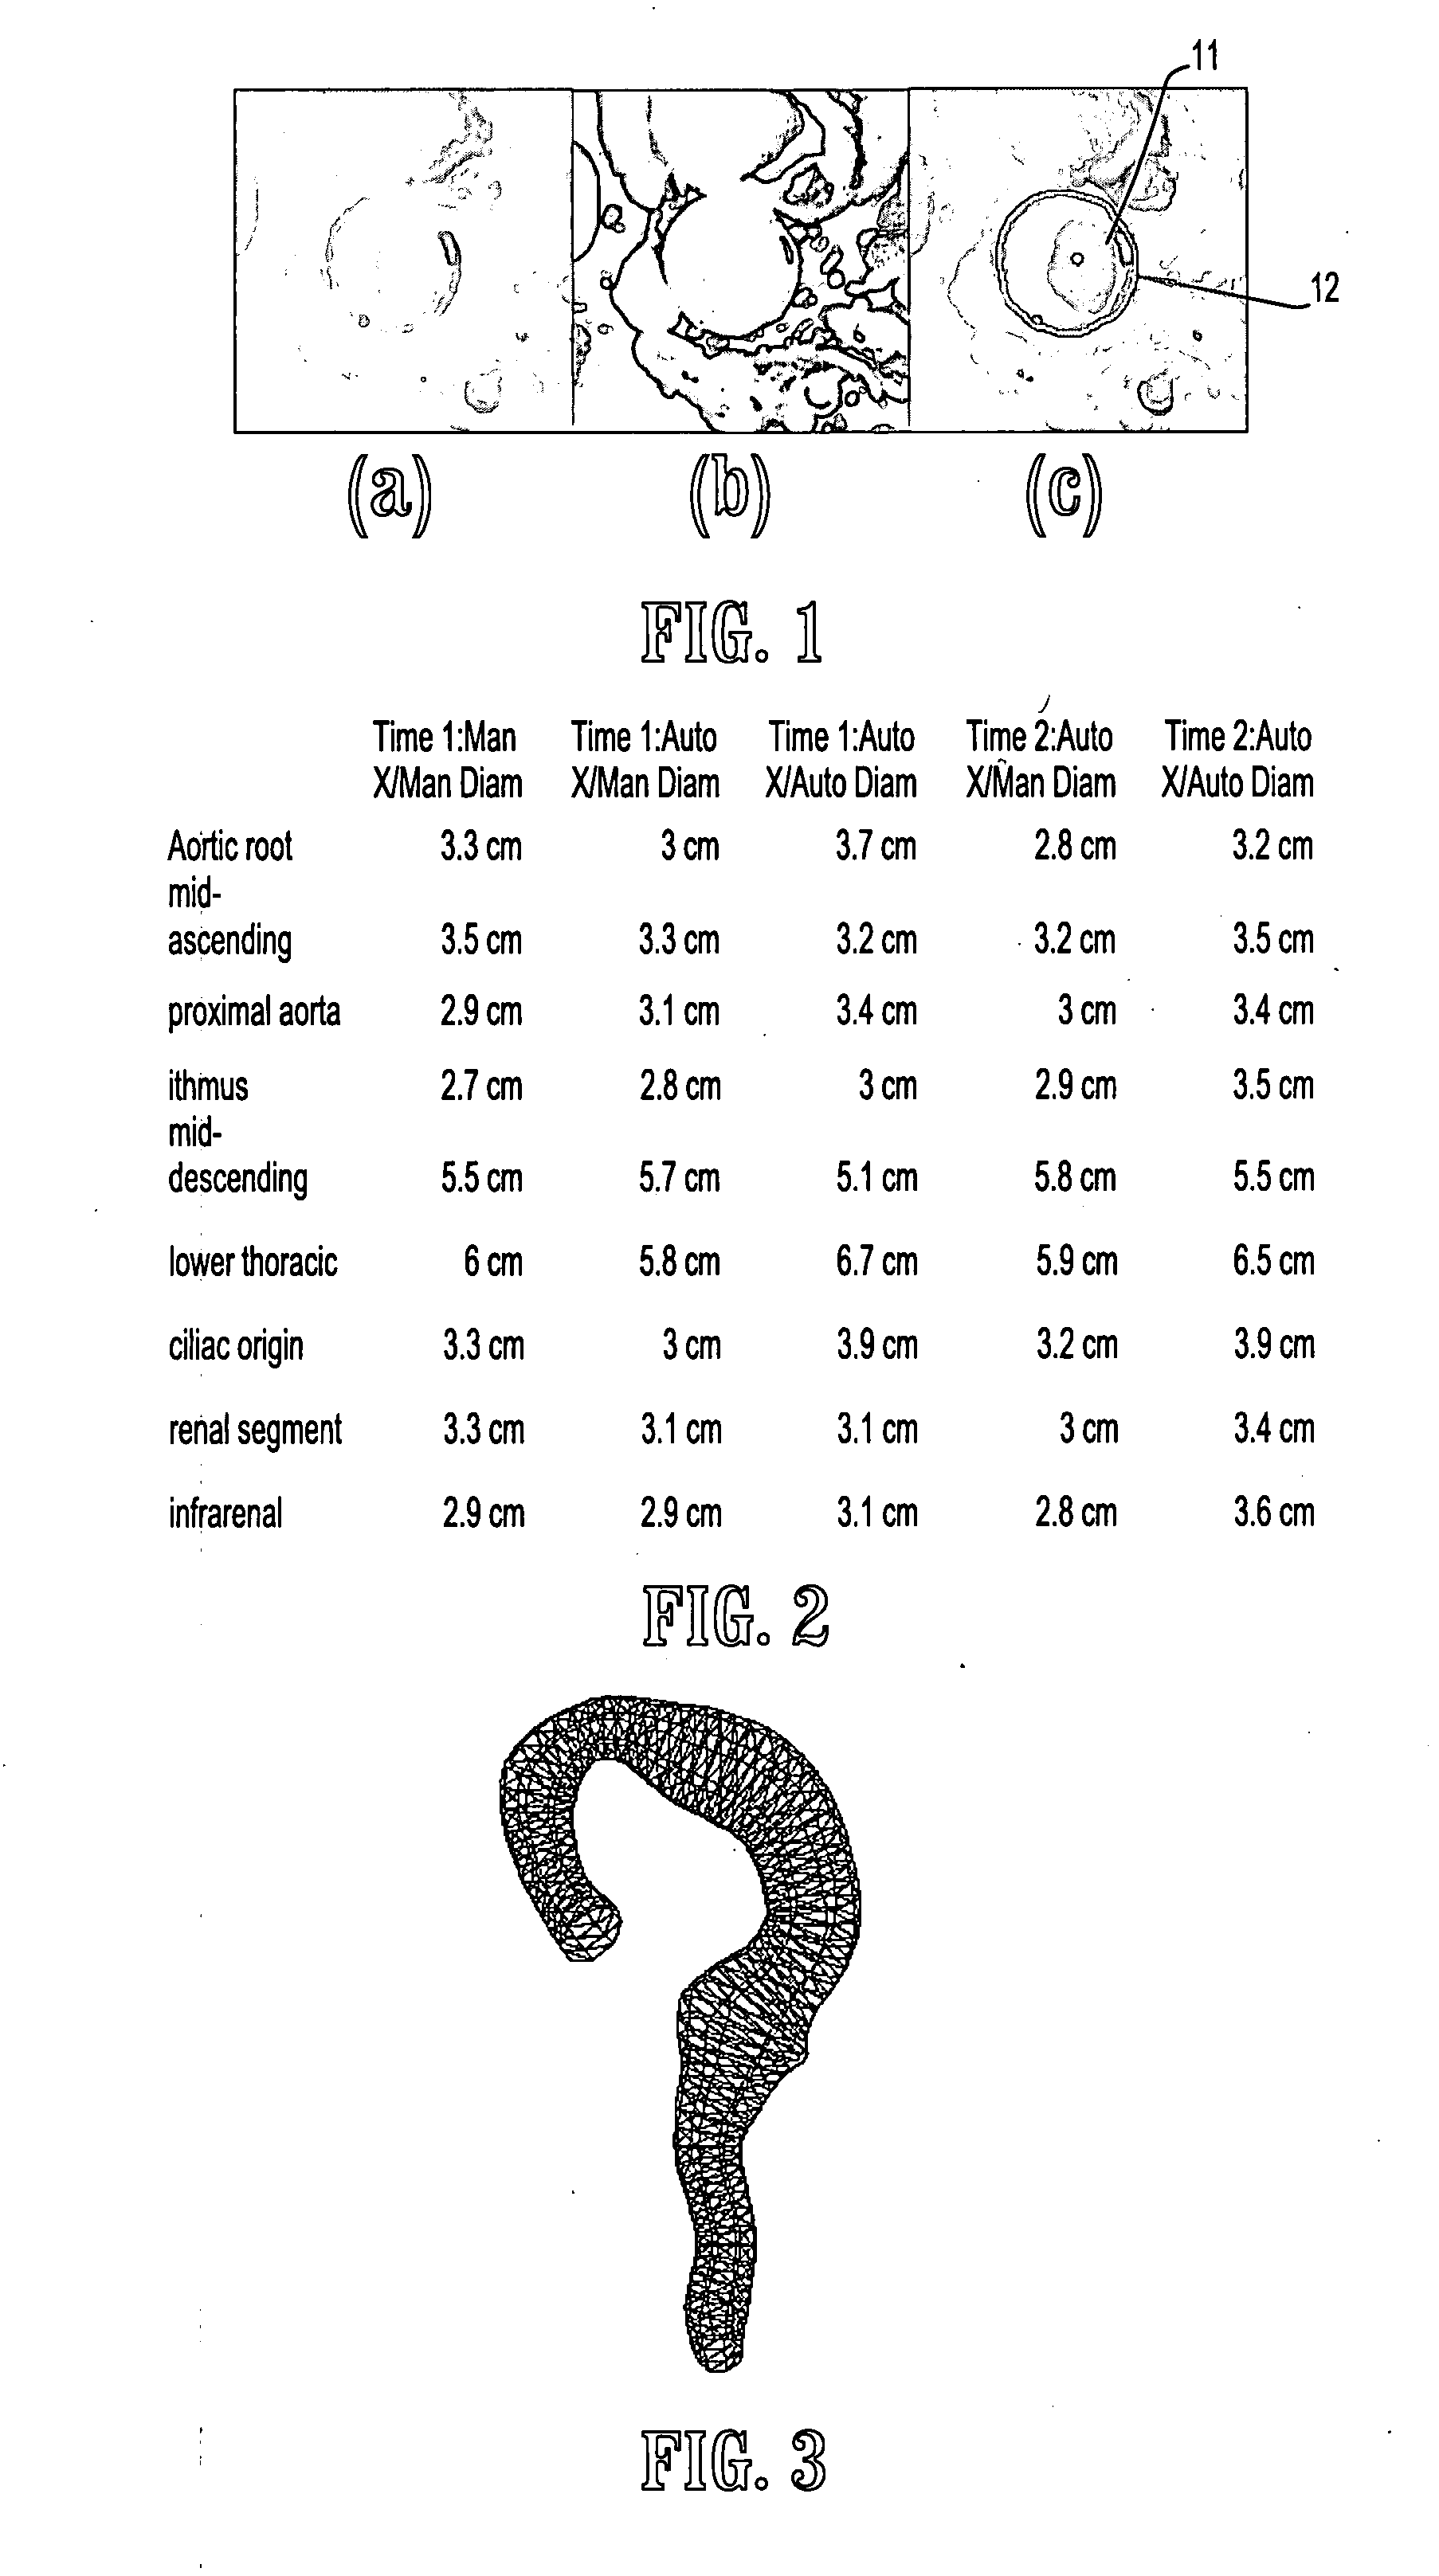 System and method for semi-automatic aortic aneurysm analysis